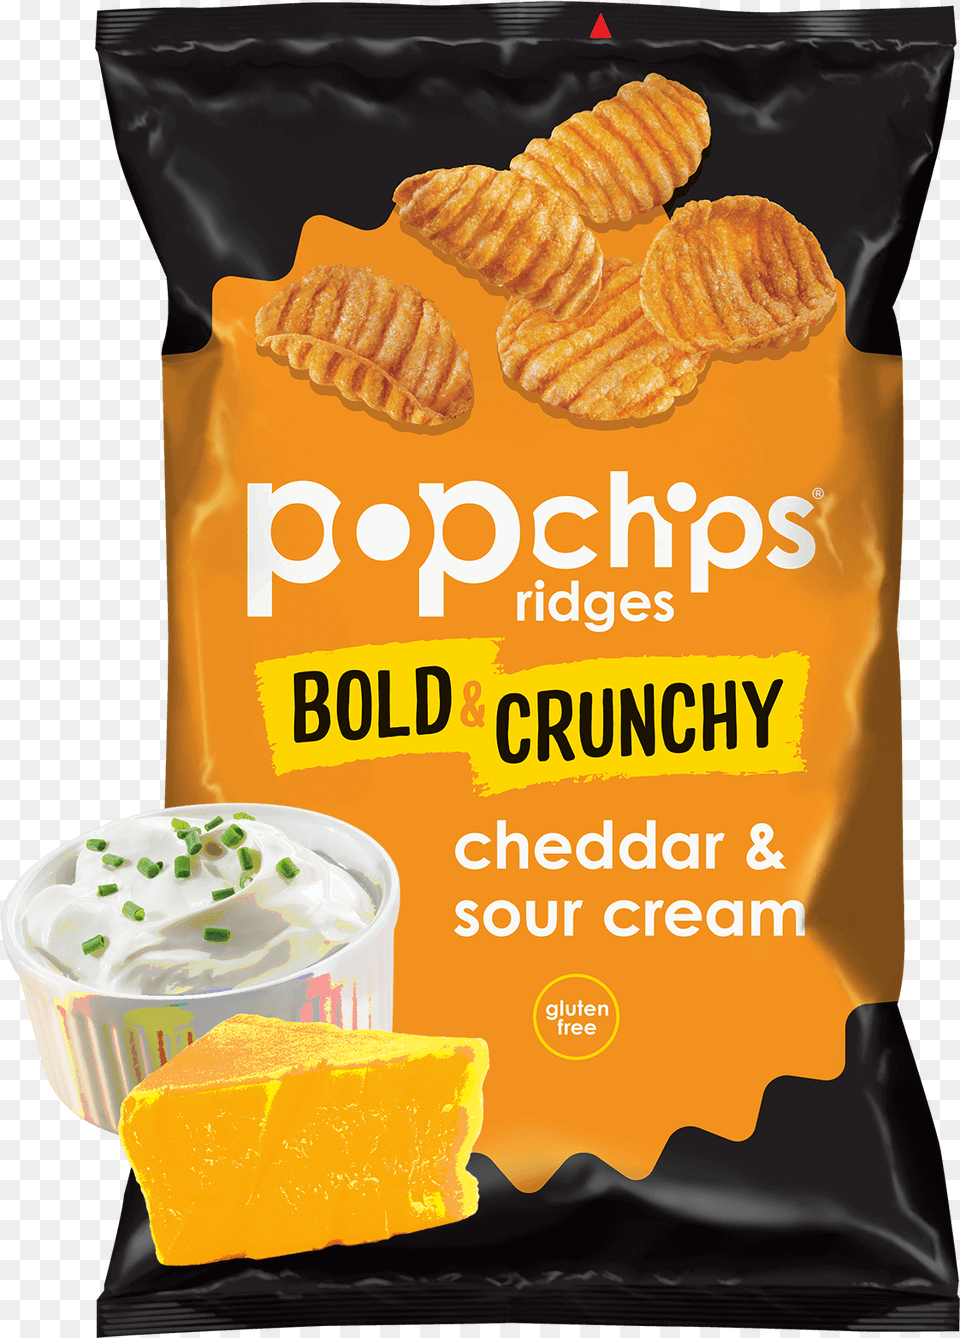 Bag Of Cheddar And Sour Cream Popchips Ridges Popchips Sour Cream And Cheddar, Food Png Image